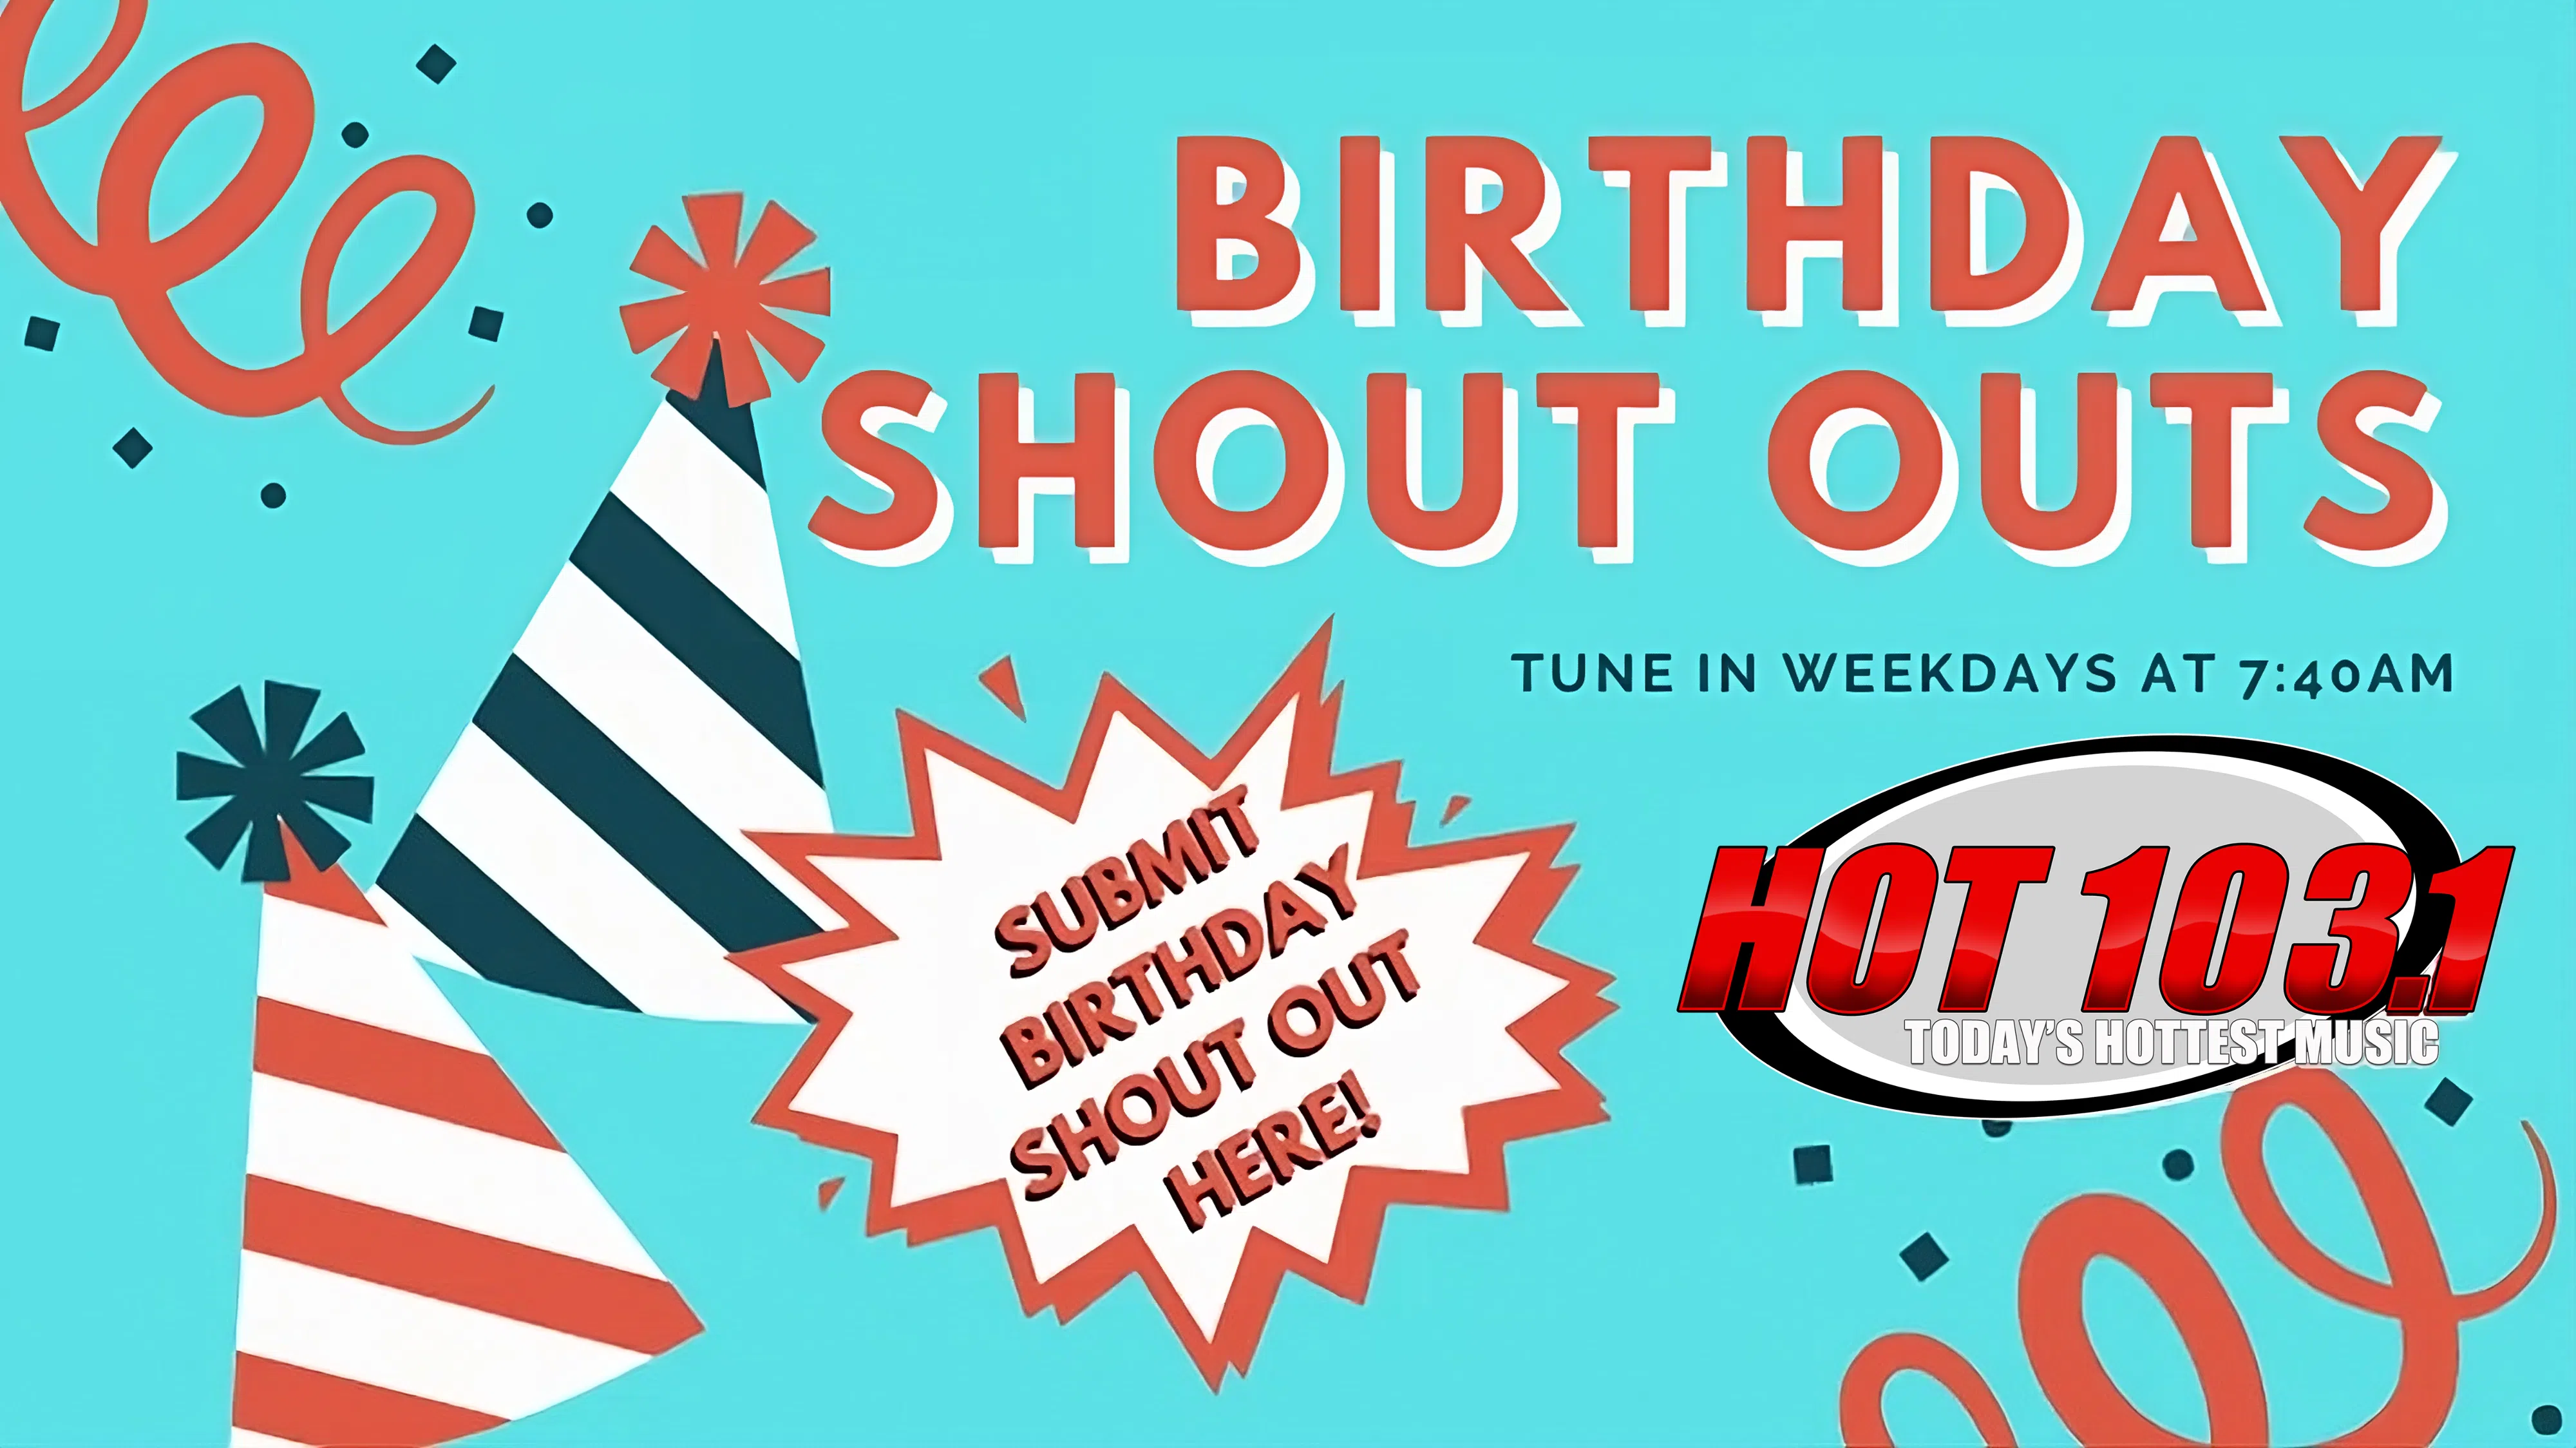 Feature: https://www.hot103.fm/birthday-shout-outs/